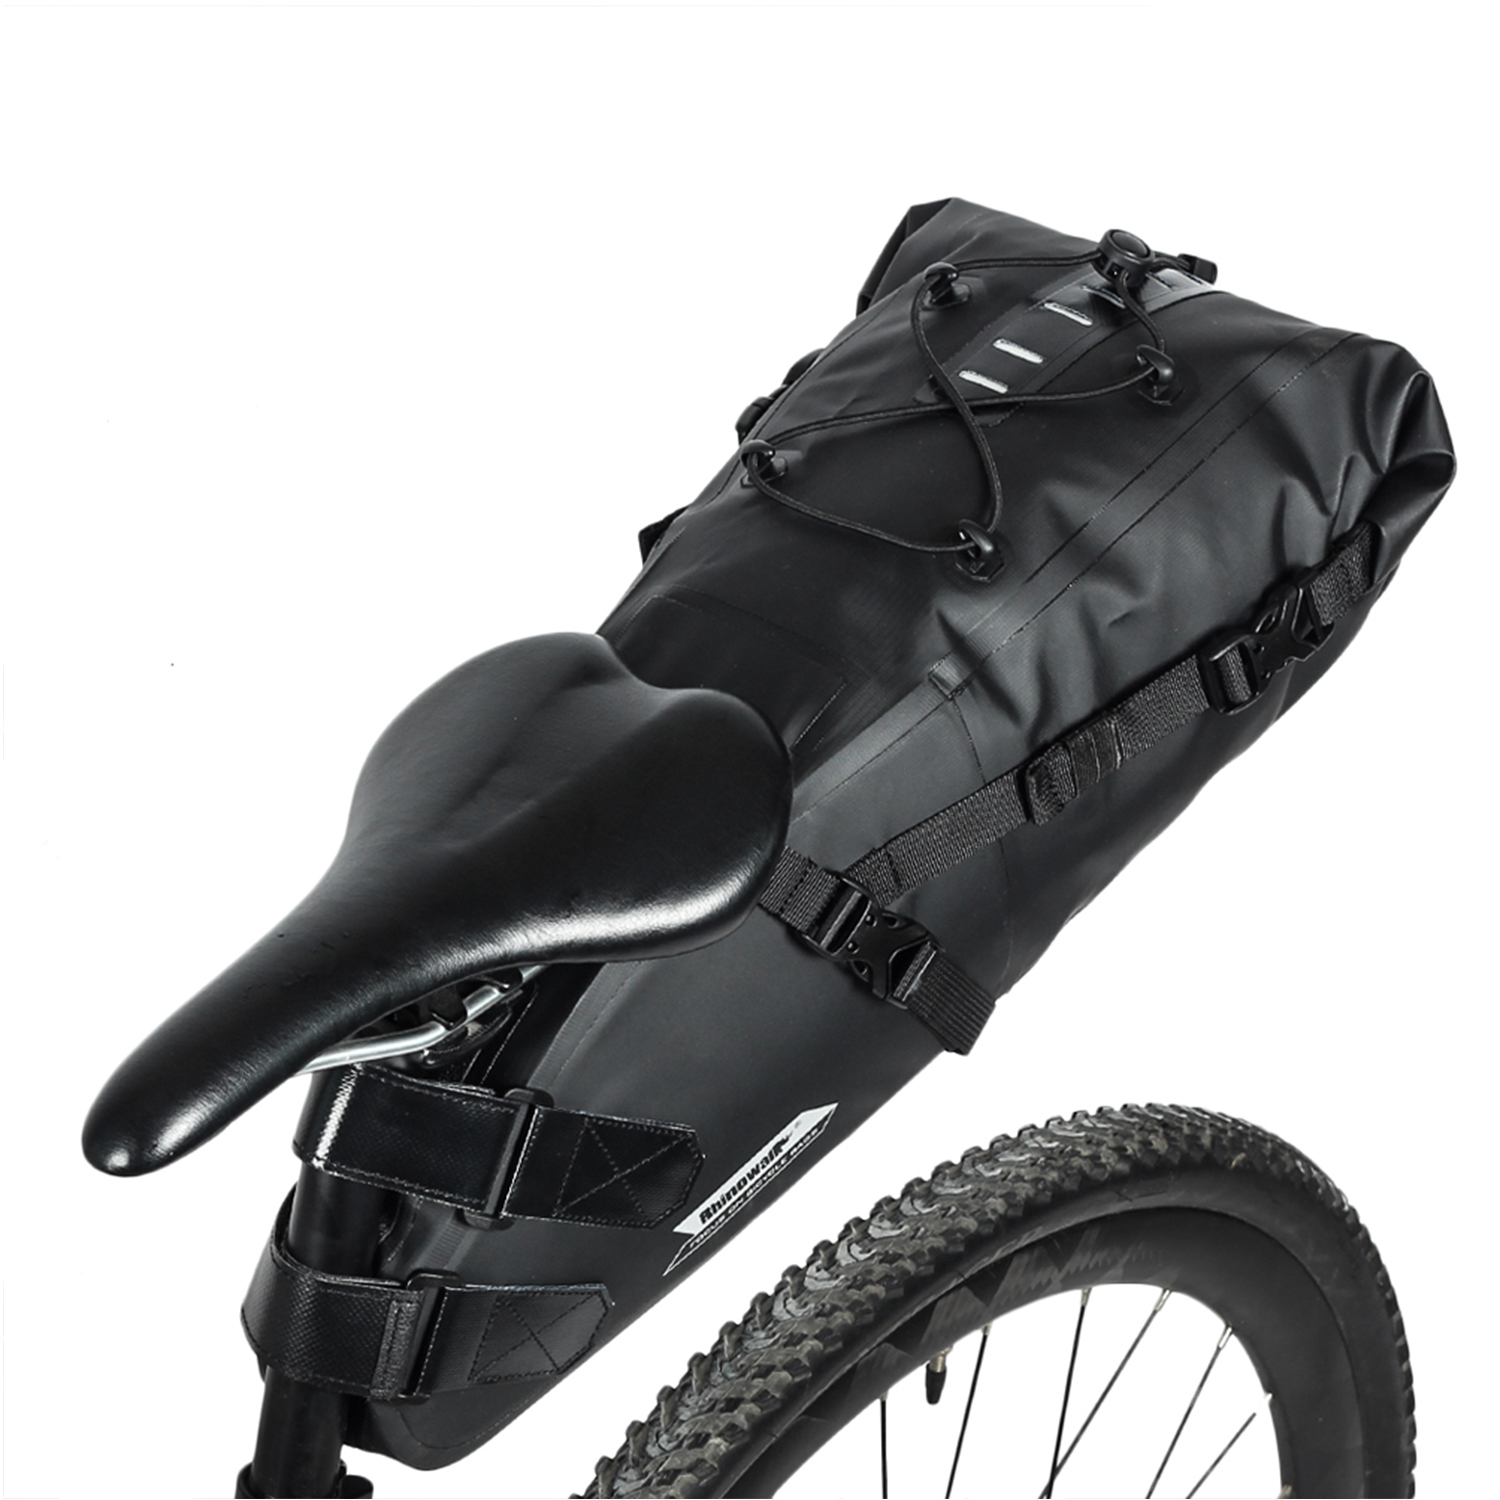 Waterproof Road and Mountain Bike Under Seat Bag Seat Post Bag with Water Bottle Pocket Large Under-Seat Storage Compartment Bicycle Bag Professional Cycling Accessories Wildken Bike Saddle Bag